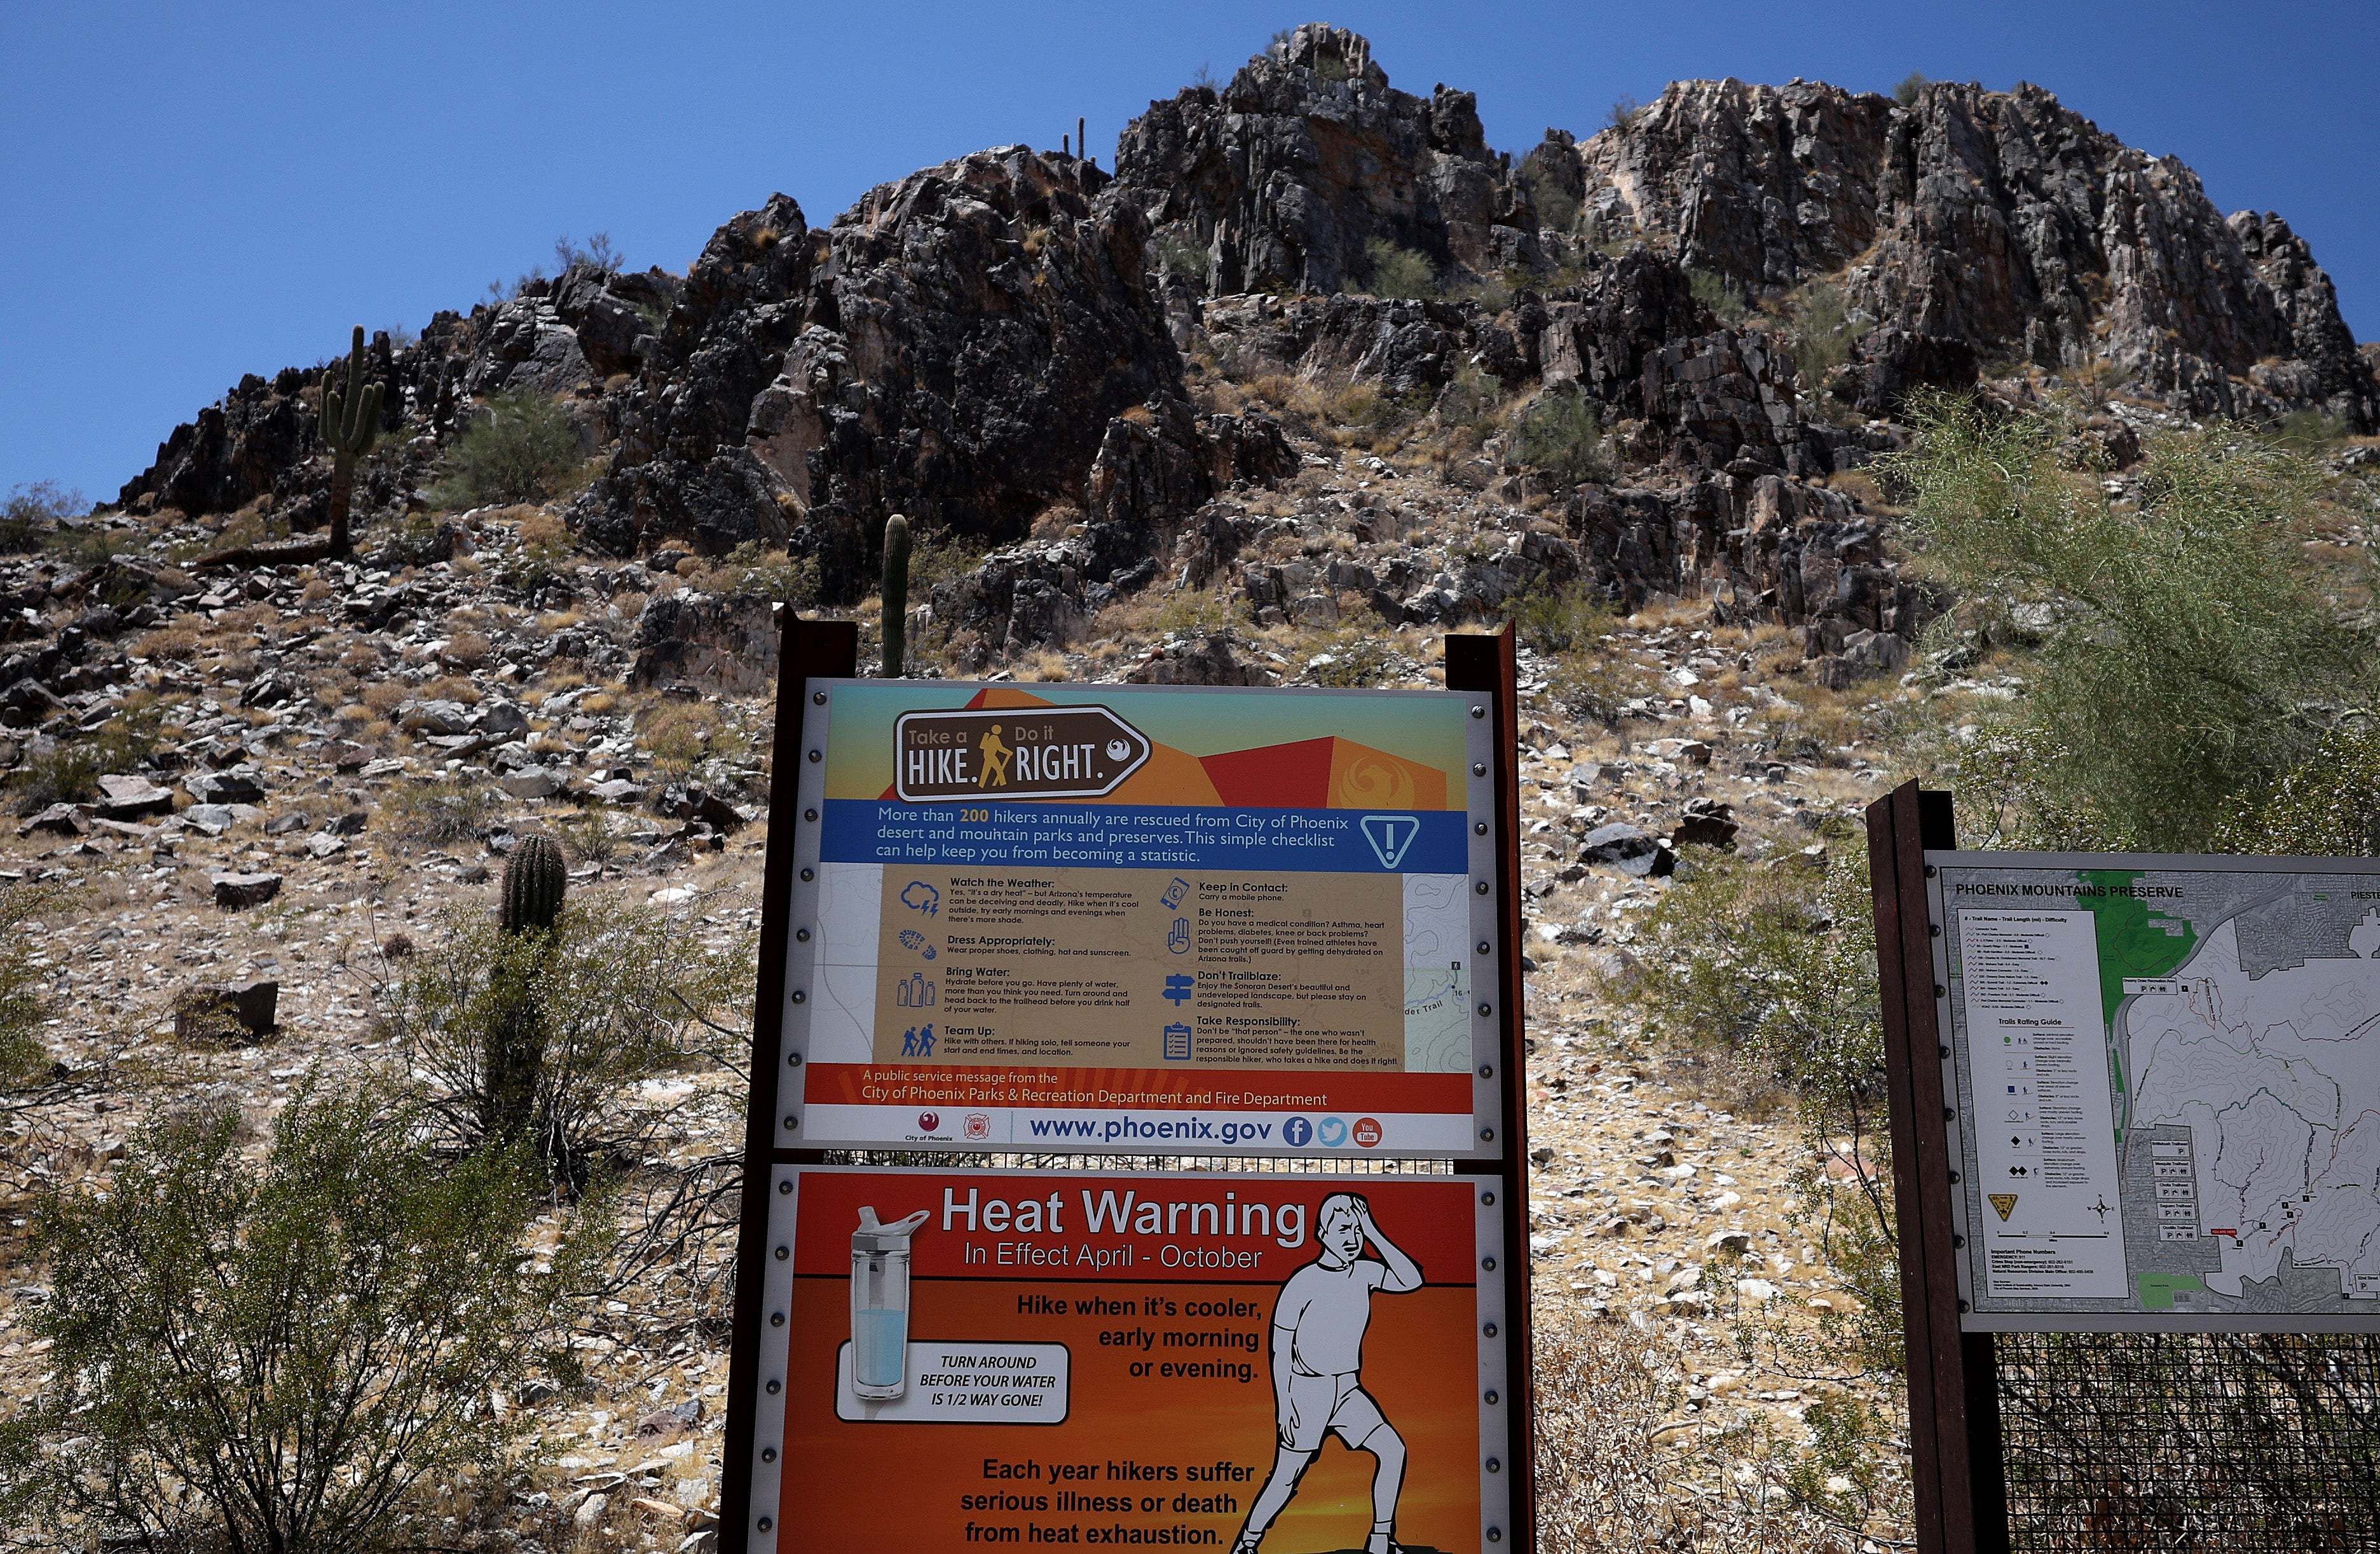 A sign in Arizona warns outdoor hikers about extreme heat. Arizona, which saw its first heat wave of the year in June, is home to the nation’s first-ever Chief Heat Officer